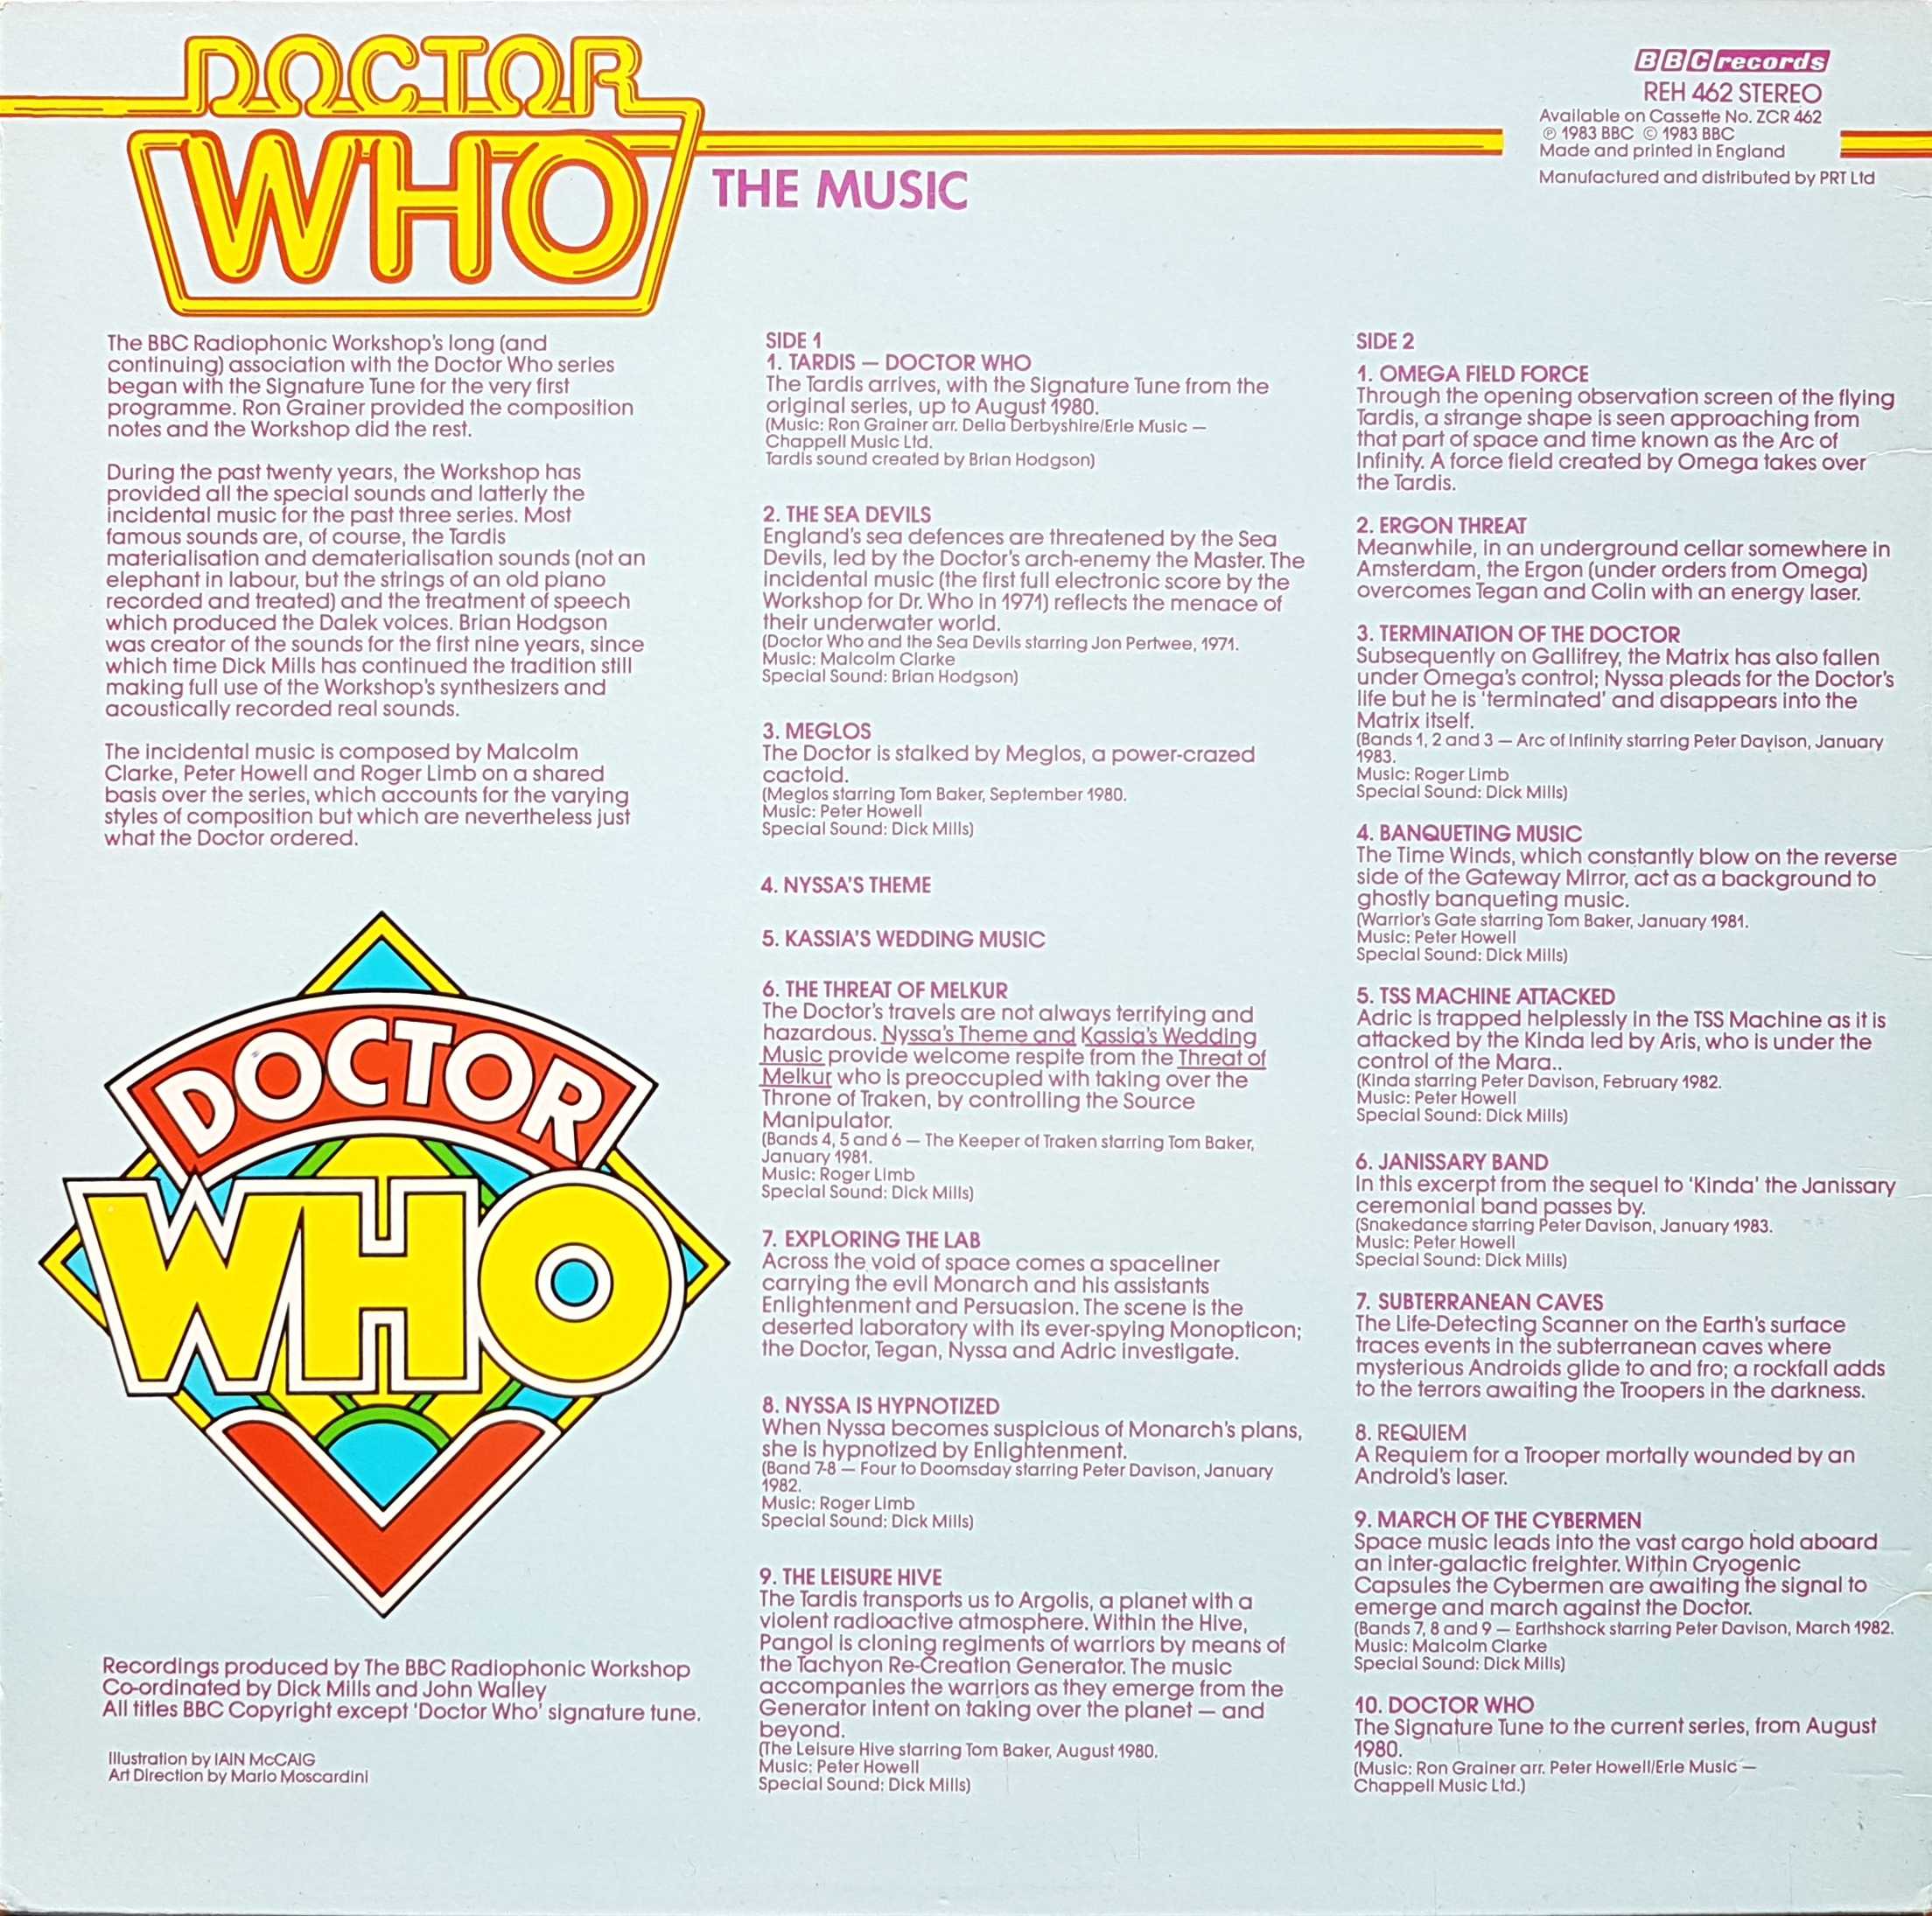 Picture of REH 462 Doctor Who - The music by artist Various from the BBC records and Tapes library